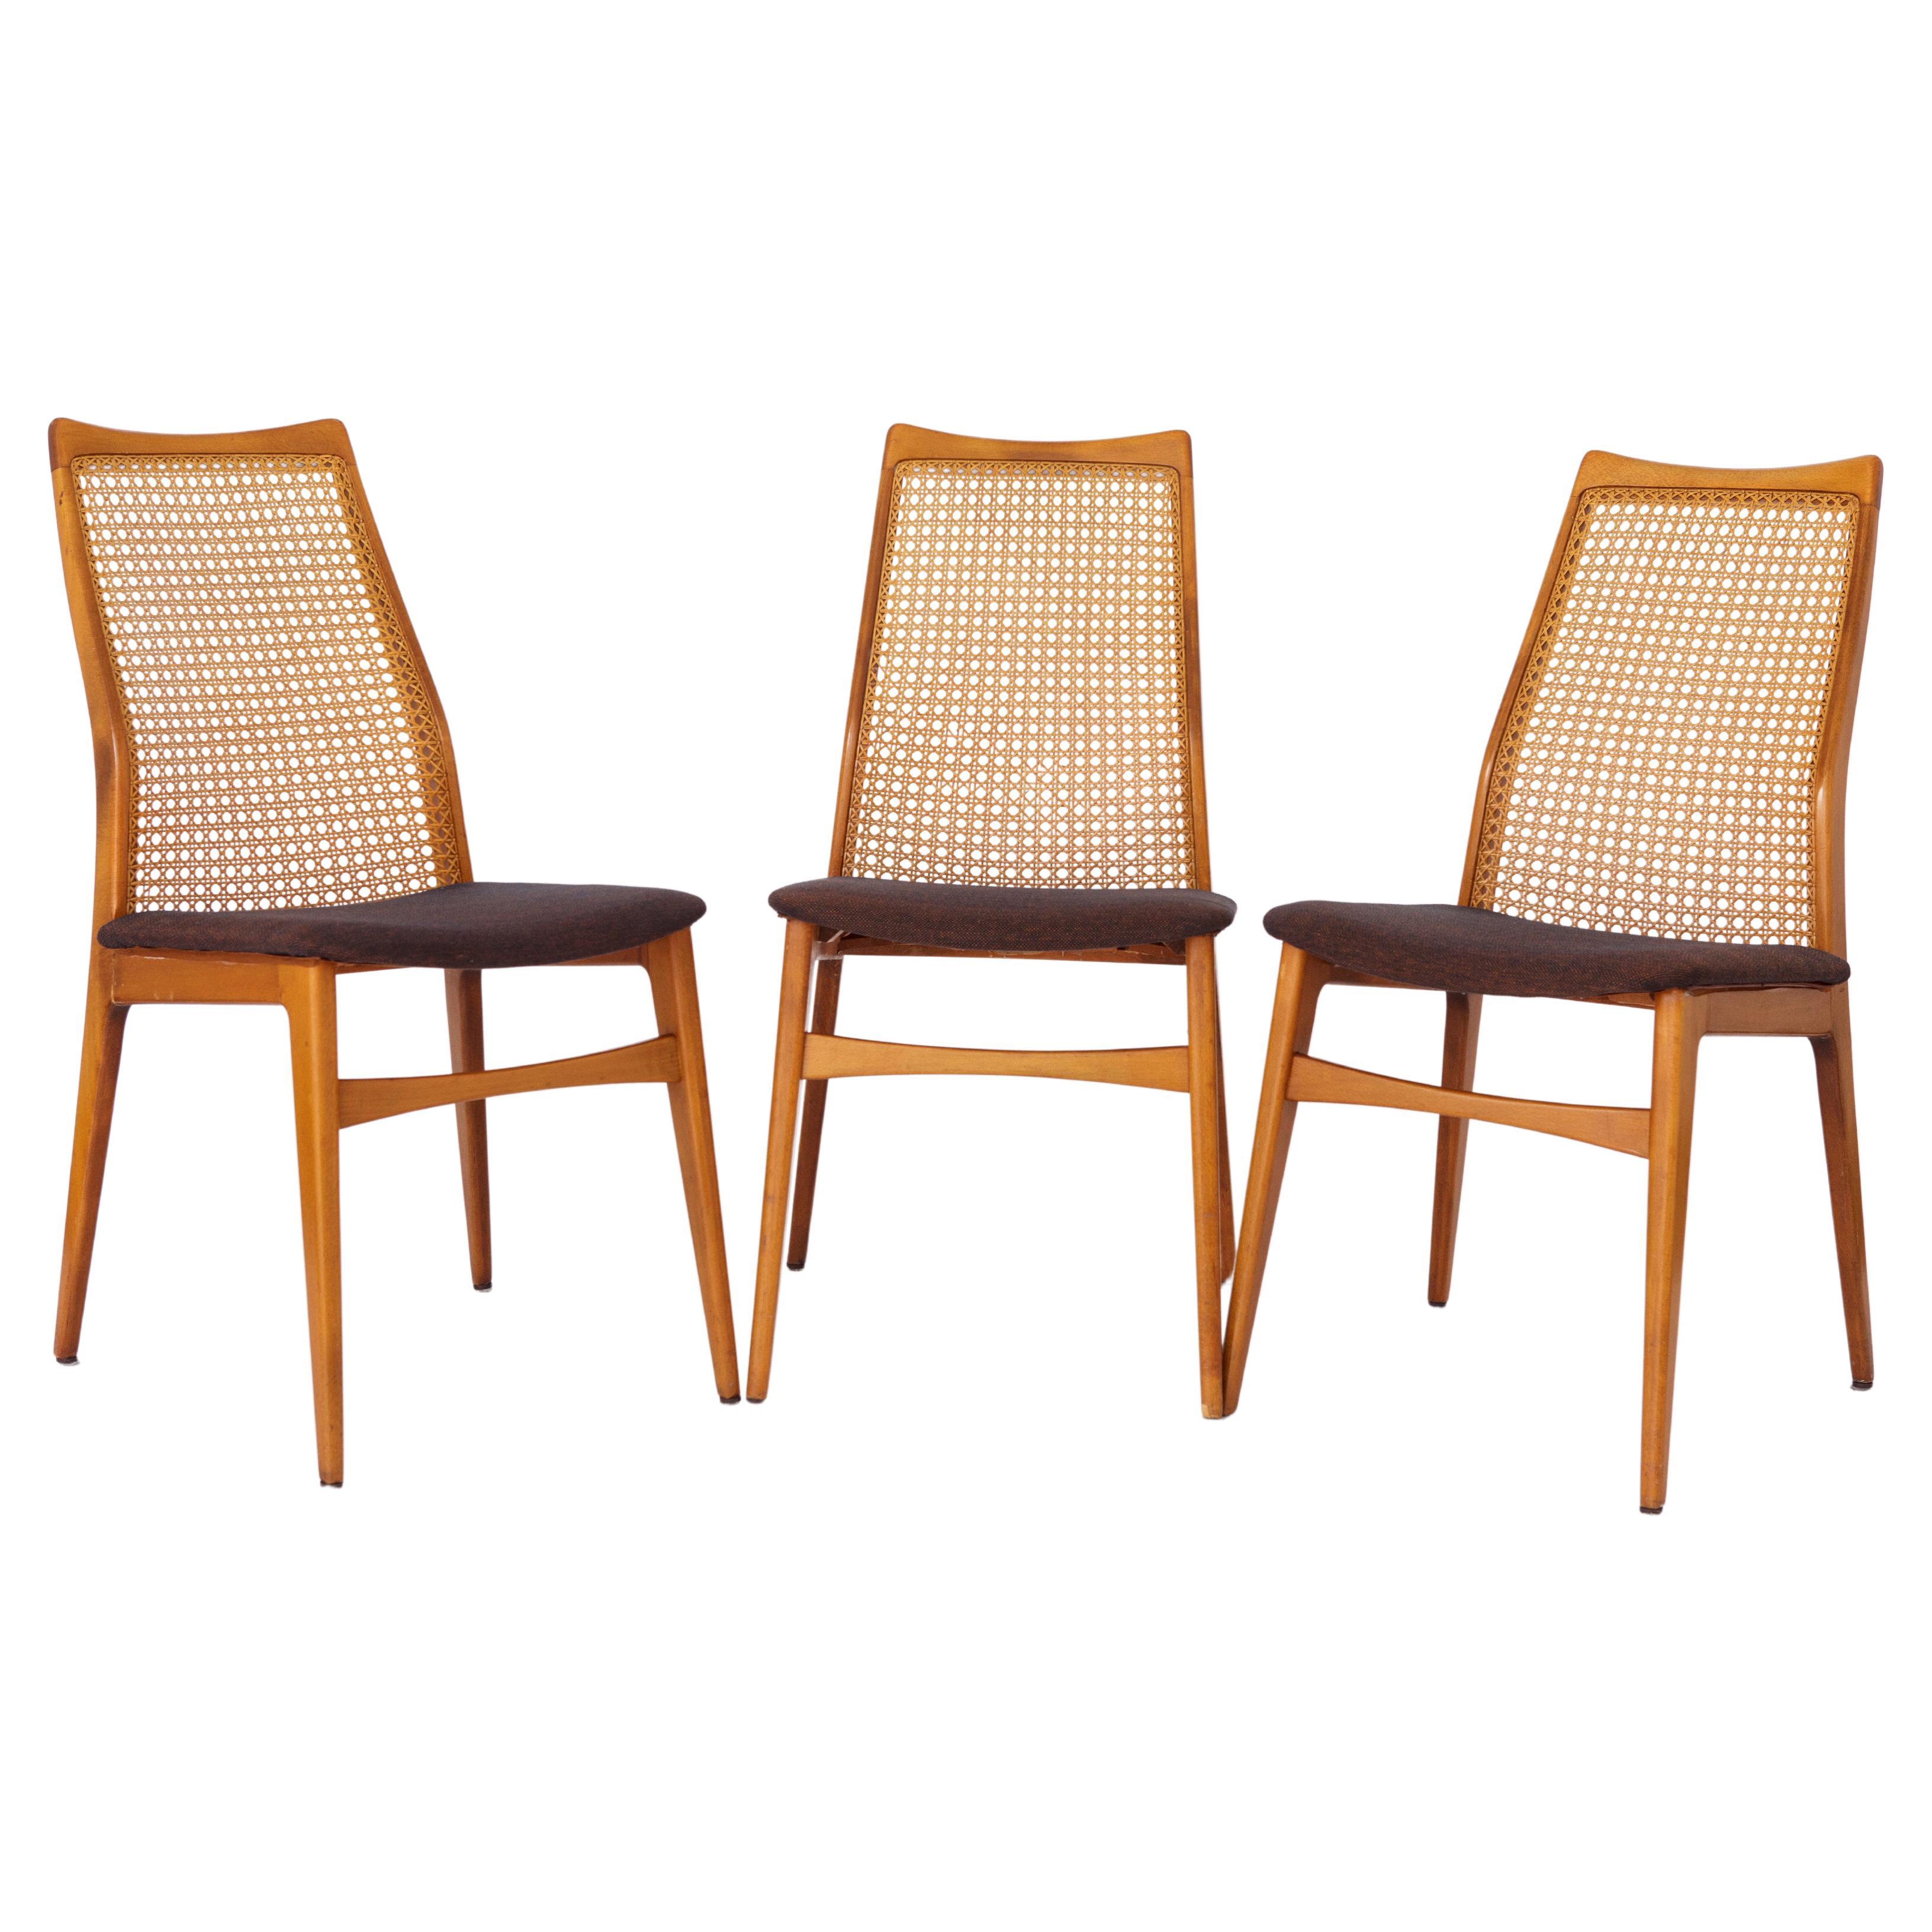 3 Vintage Chairs 1960s Germany by Wilhelm Benze